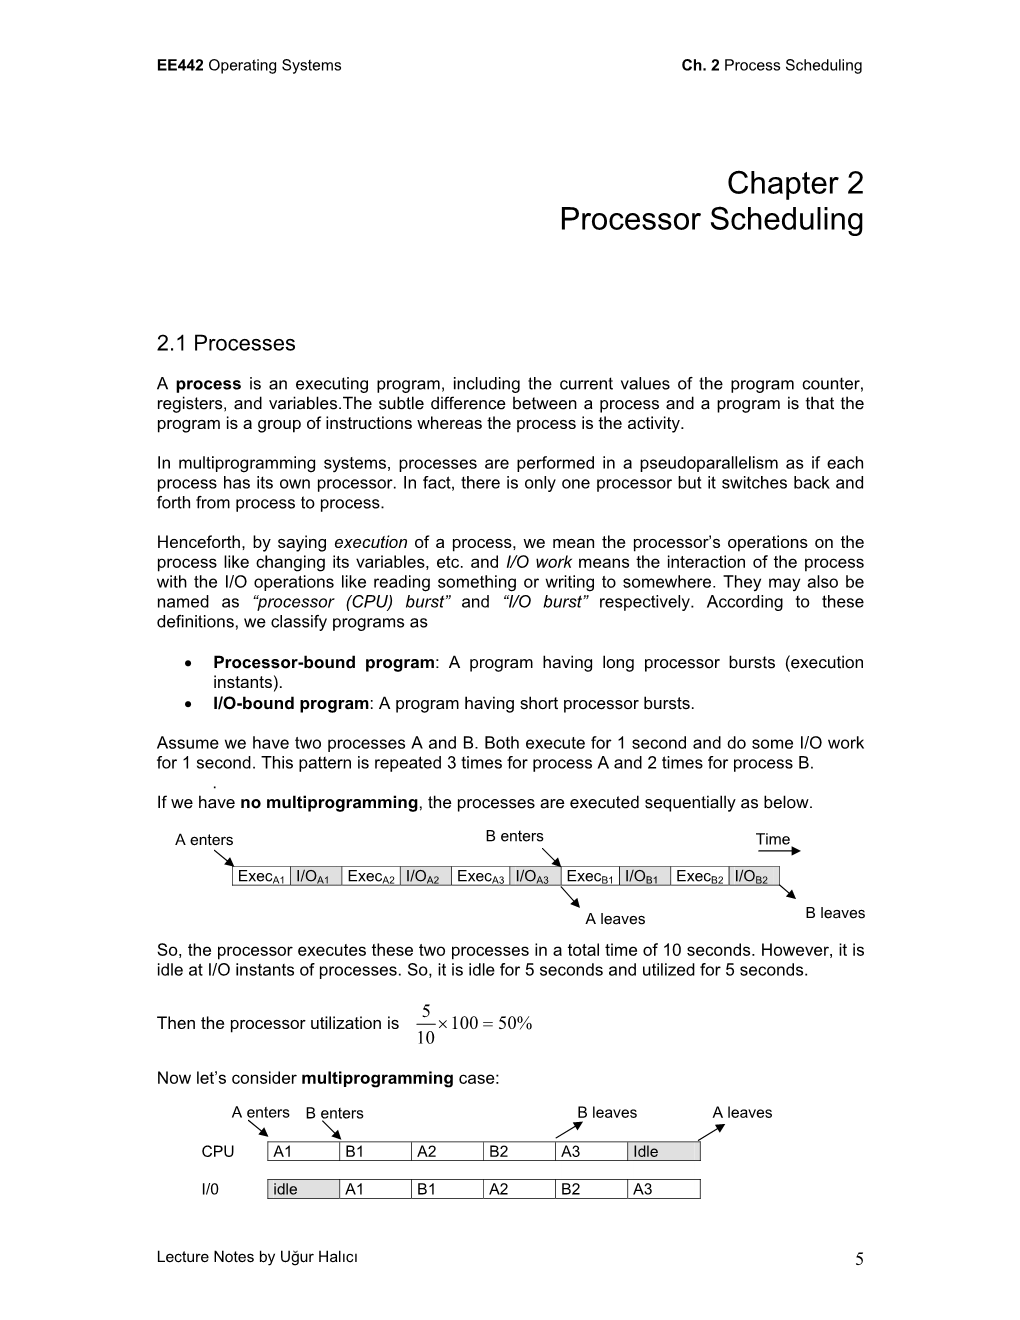 Chapter 2 Processor Scheduling